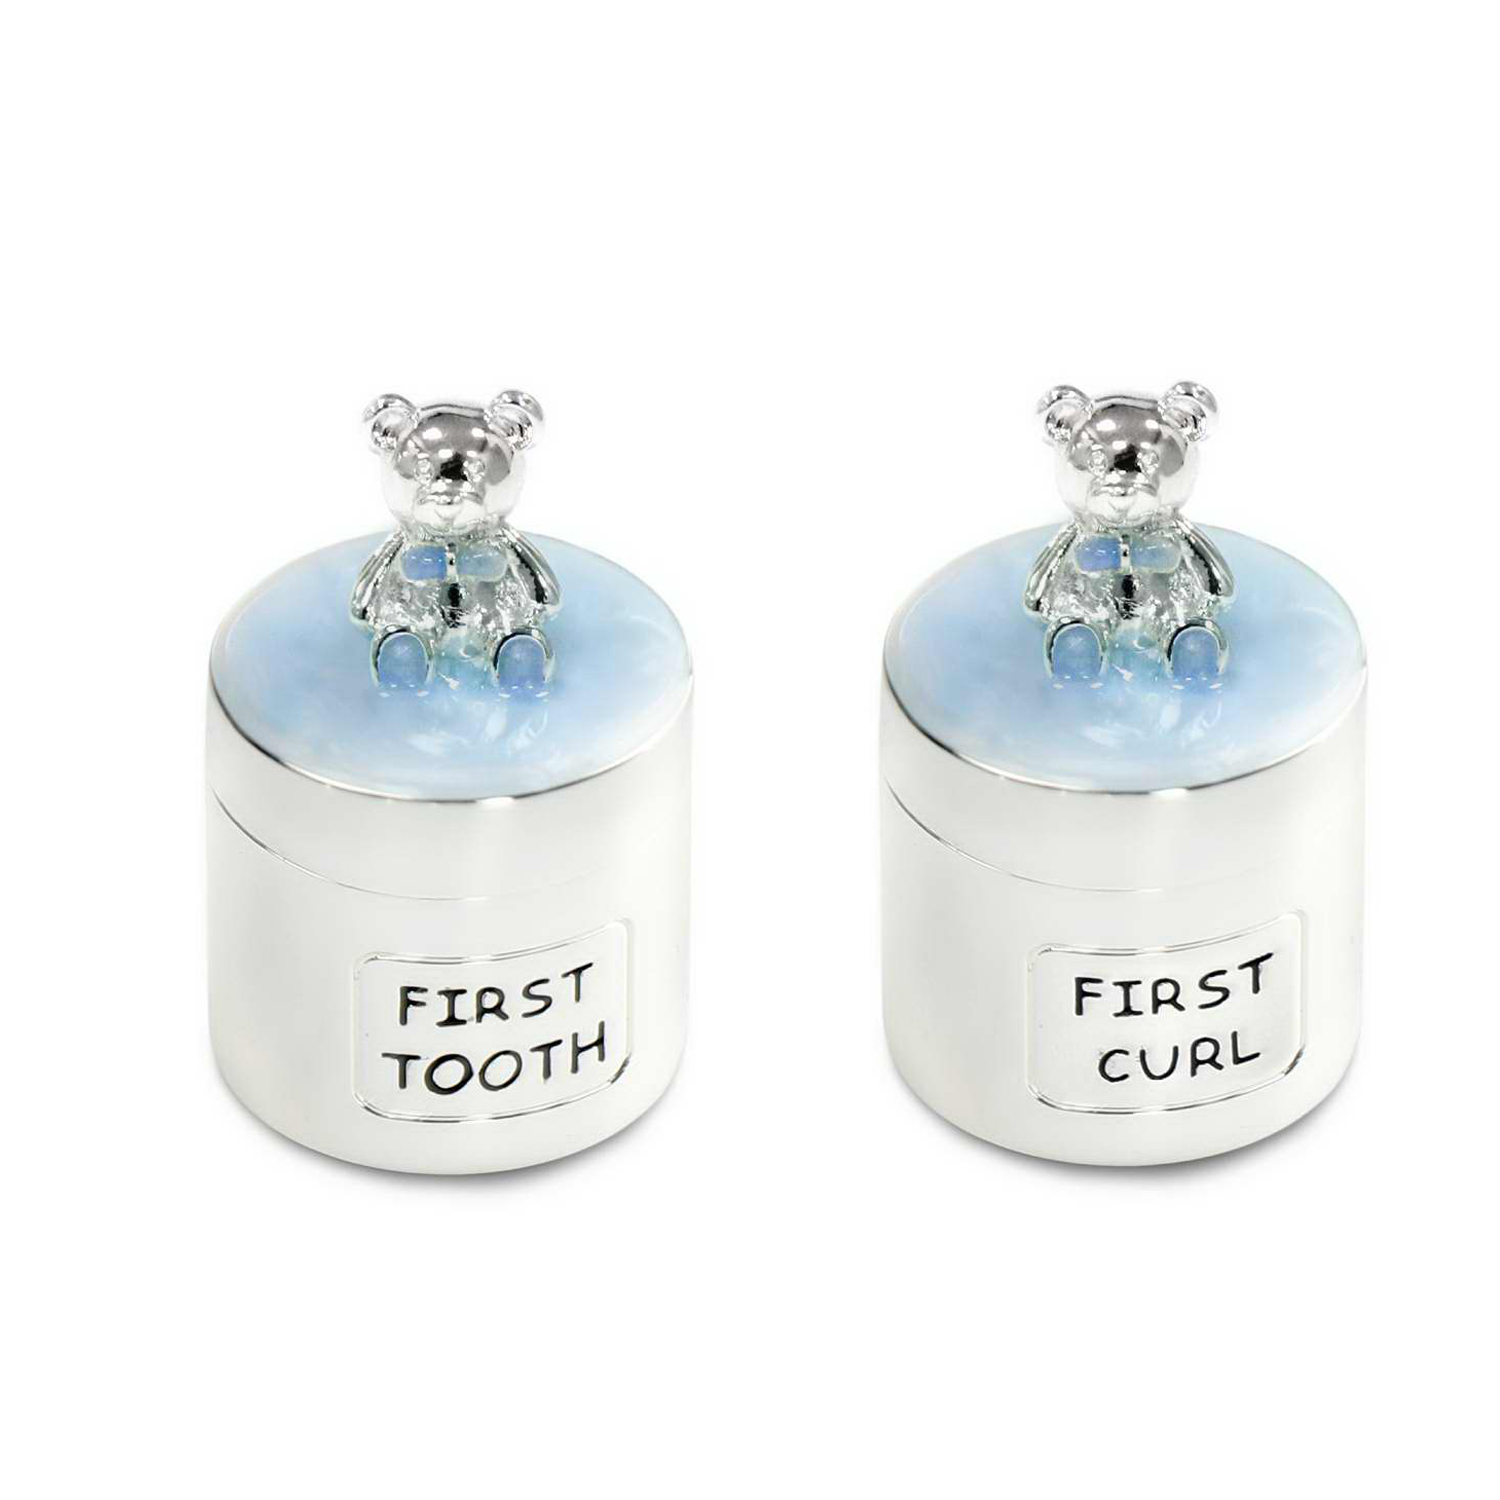   Little Bear my first tooth & curl trinket box